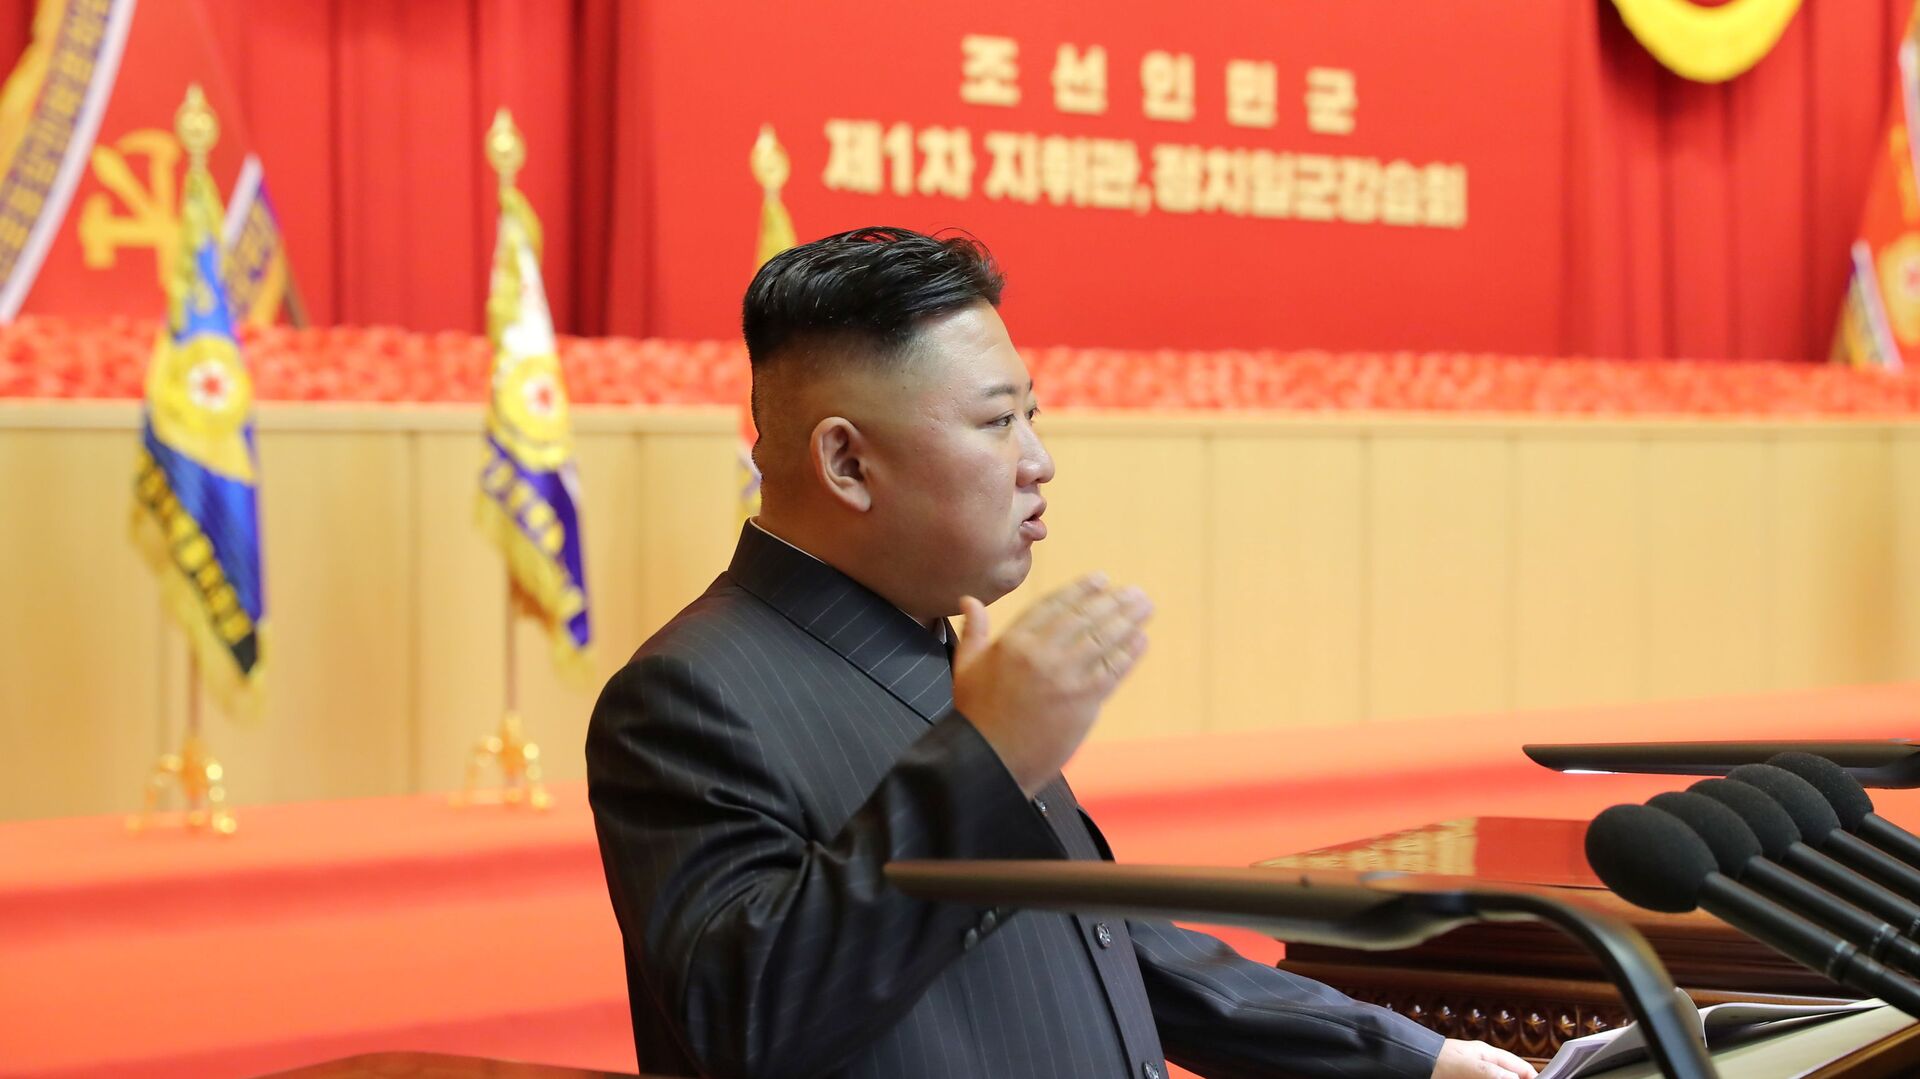 North Korea's leader Kim Jong Un leads the first workshop of the commanders and political officers of the Korean People's Army (KPA) in Pyongyang, North Korea in this image supplied by North Korea's Korean Central News Agency on July 30, 2021. - Sputnik International, 1920, 01.01.2022